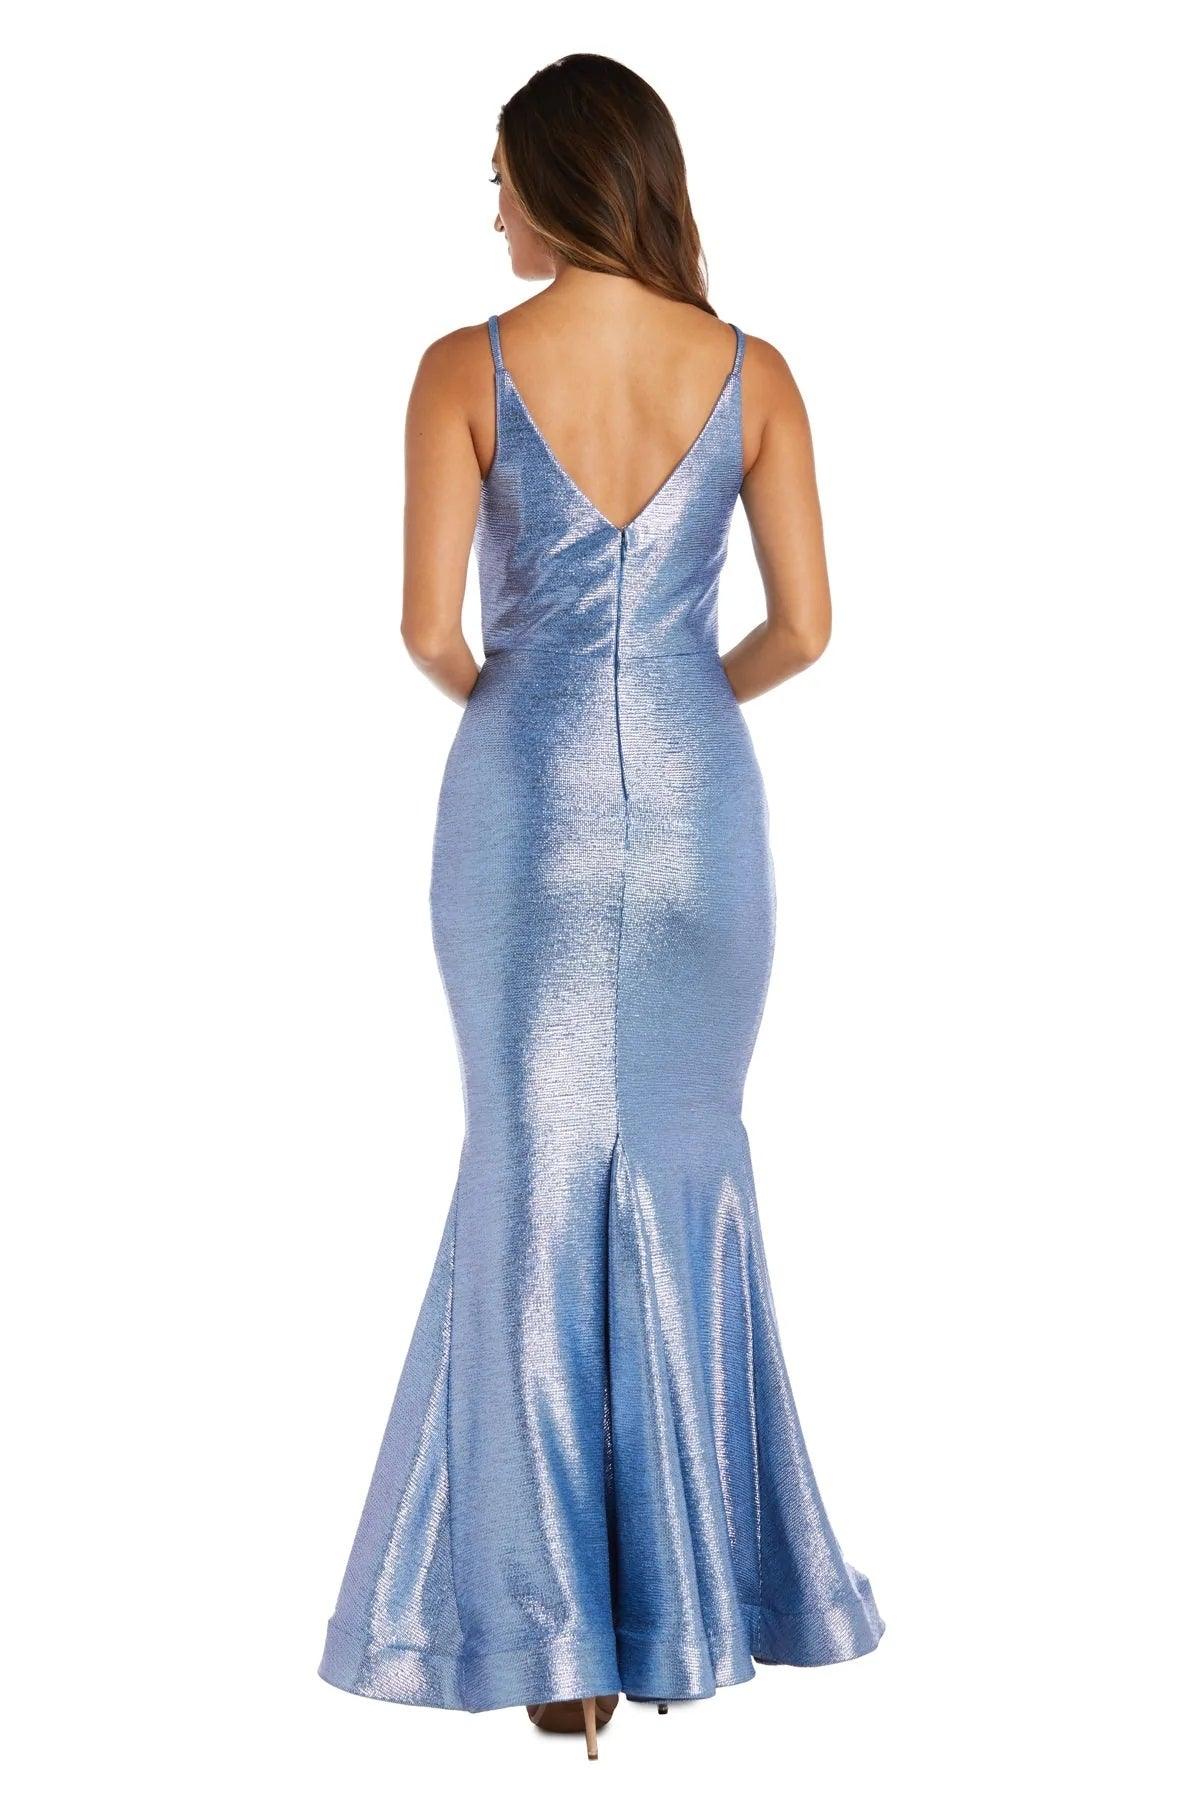 Morgan & Co Prom Long Formal Petite Dress 22122P - The Dress Outlet